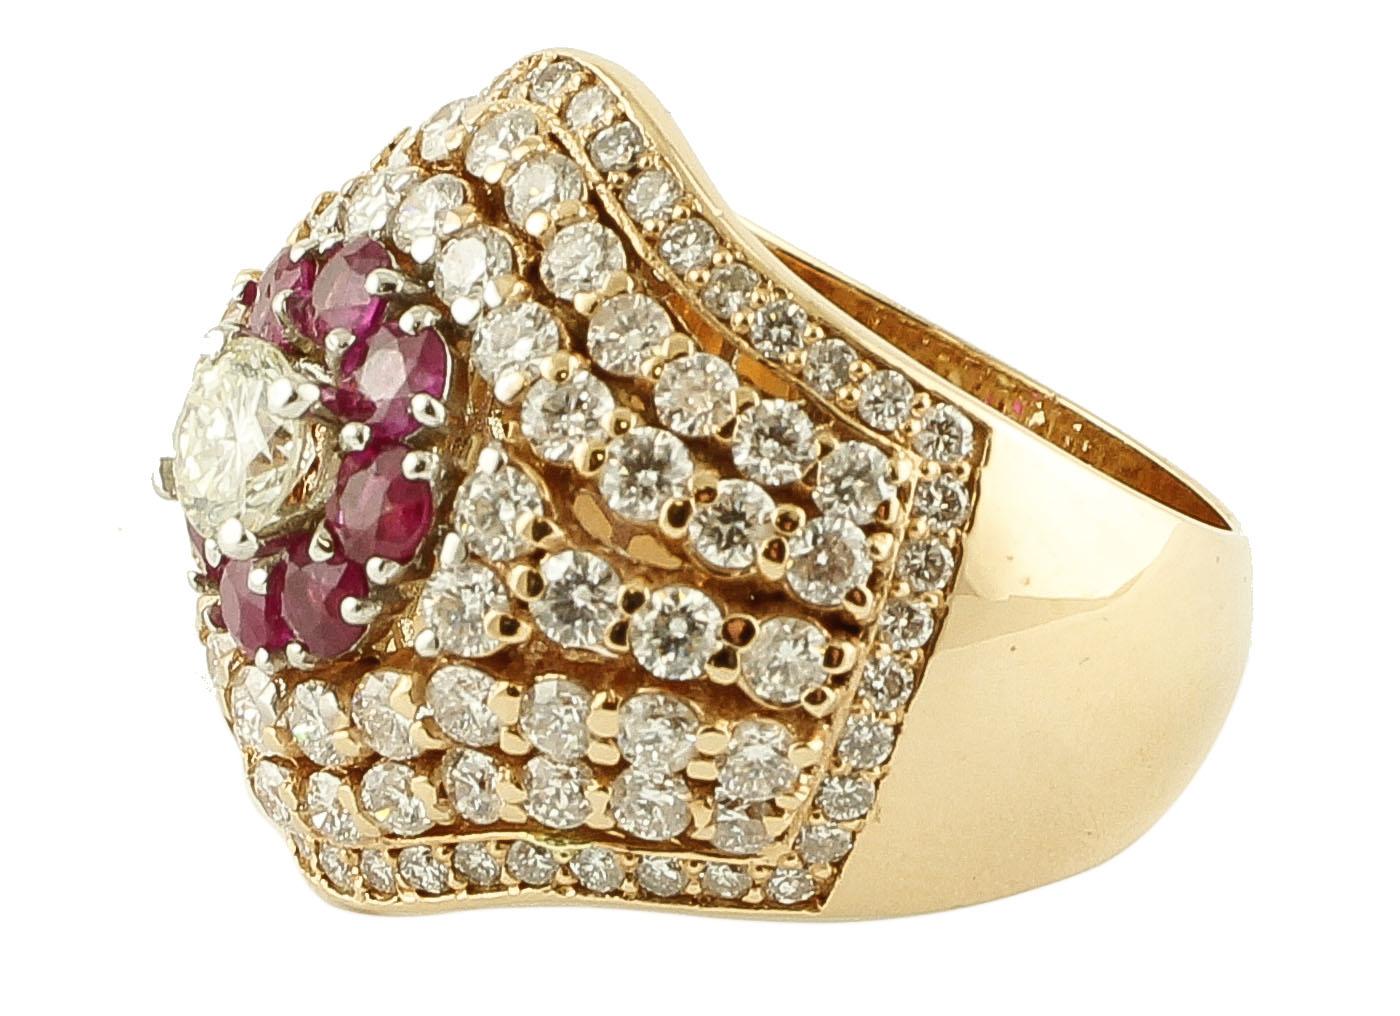 SHIPPING POLICY:
No additional costs will be added to this order.
Shipping costs will be totally covered by the seller (customs duties included).

Astonishing ring in 18k rose gold structure studded with diamonds and rubies with a central beautiful